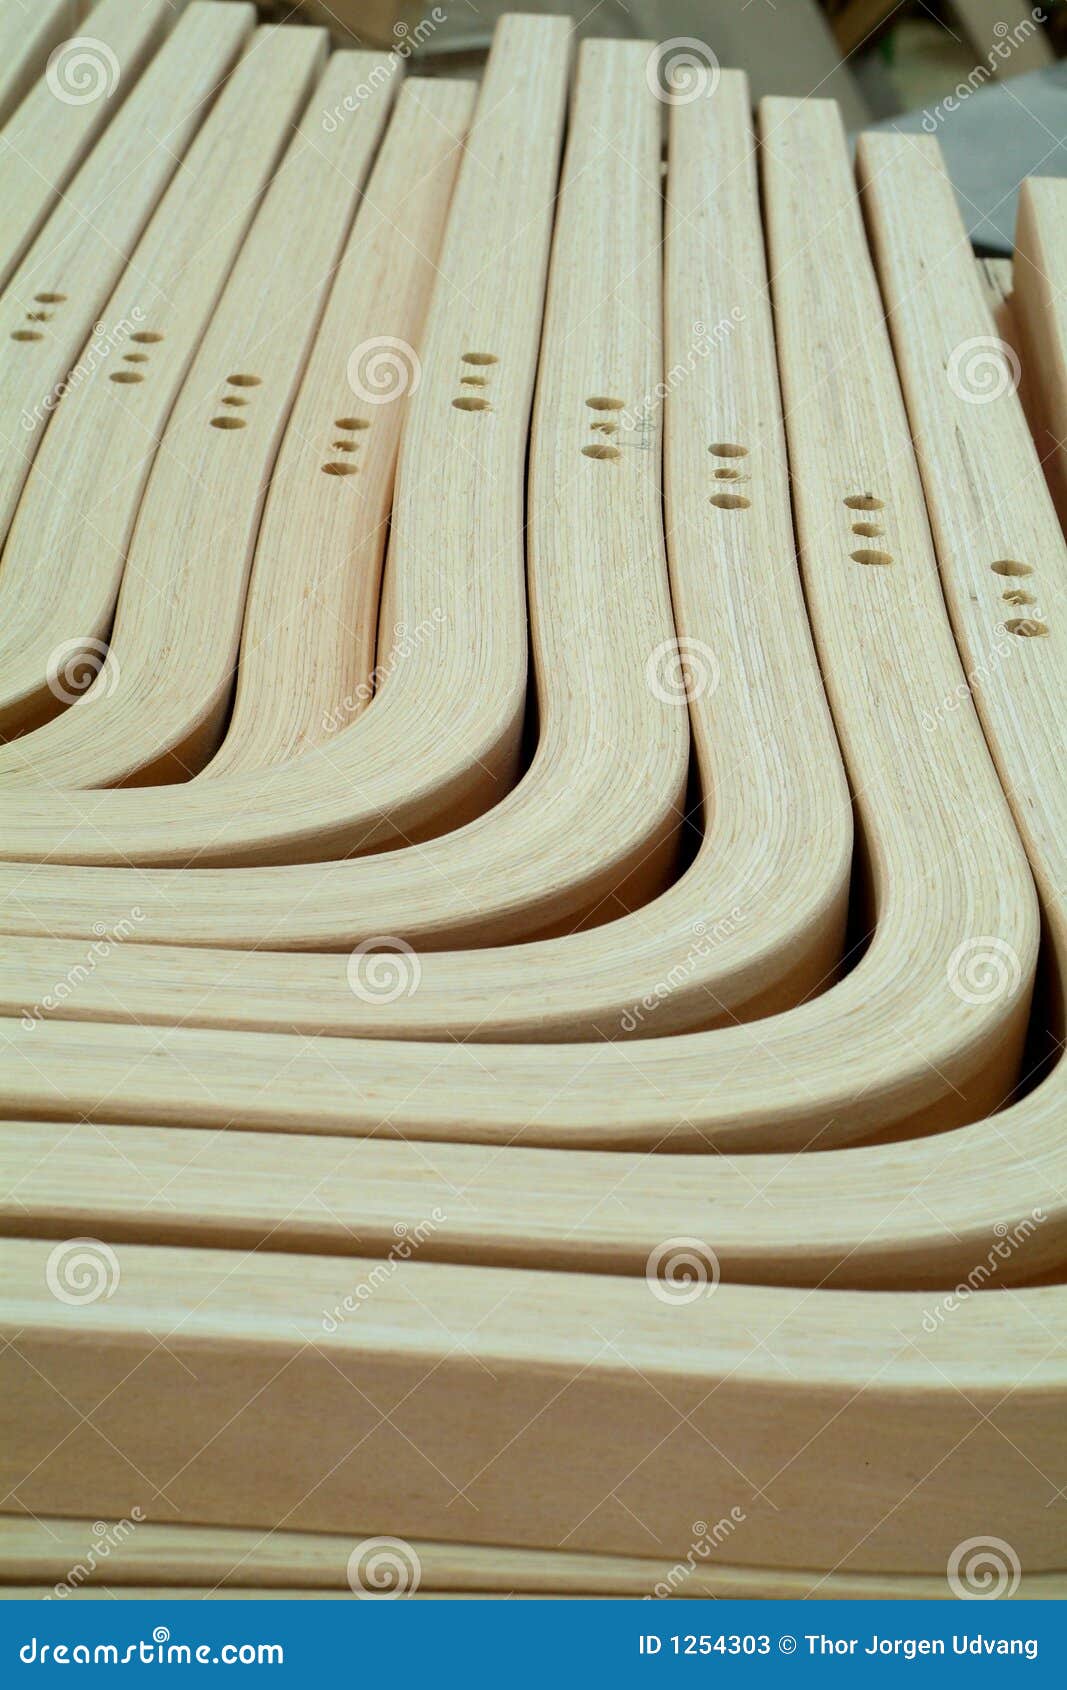 laminated, wooden parts for furniture production